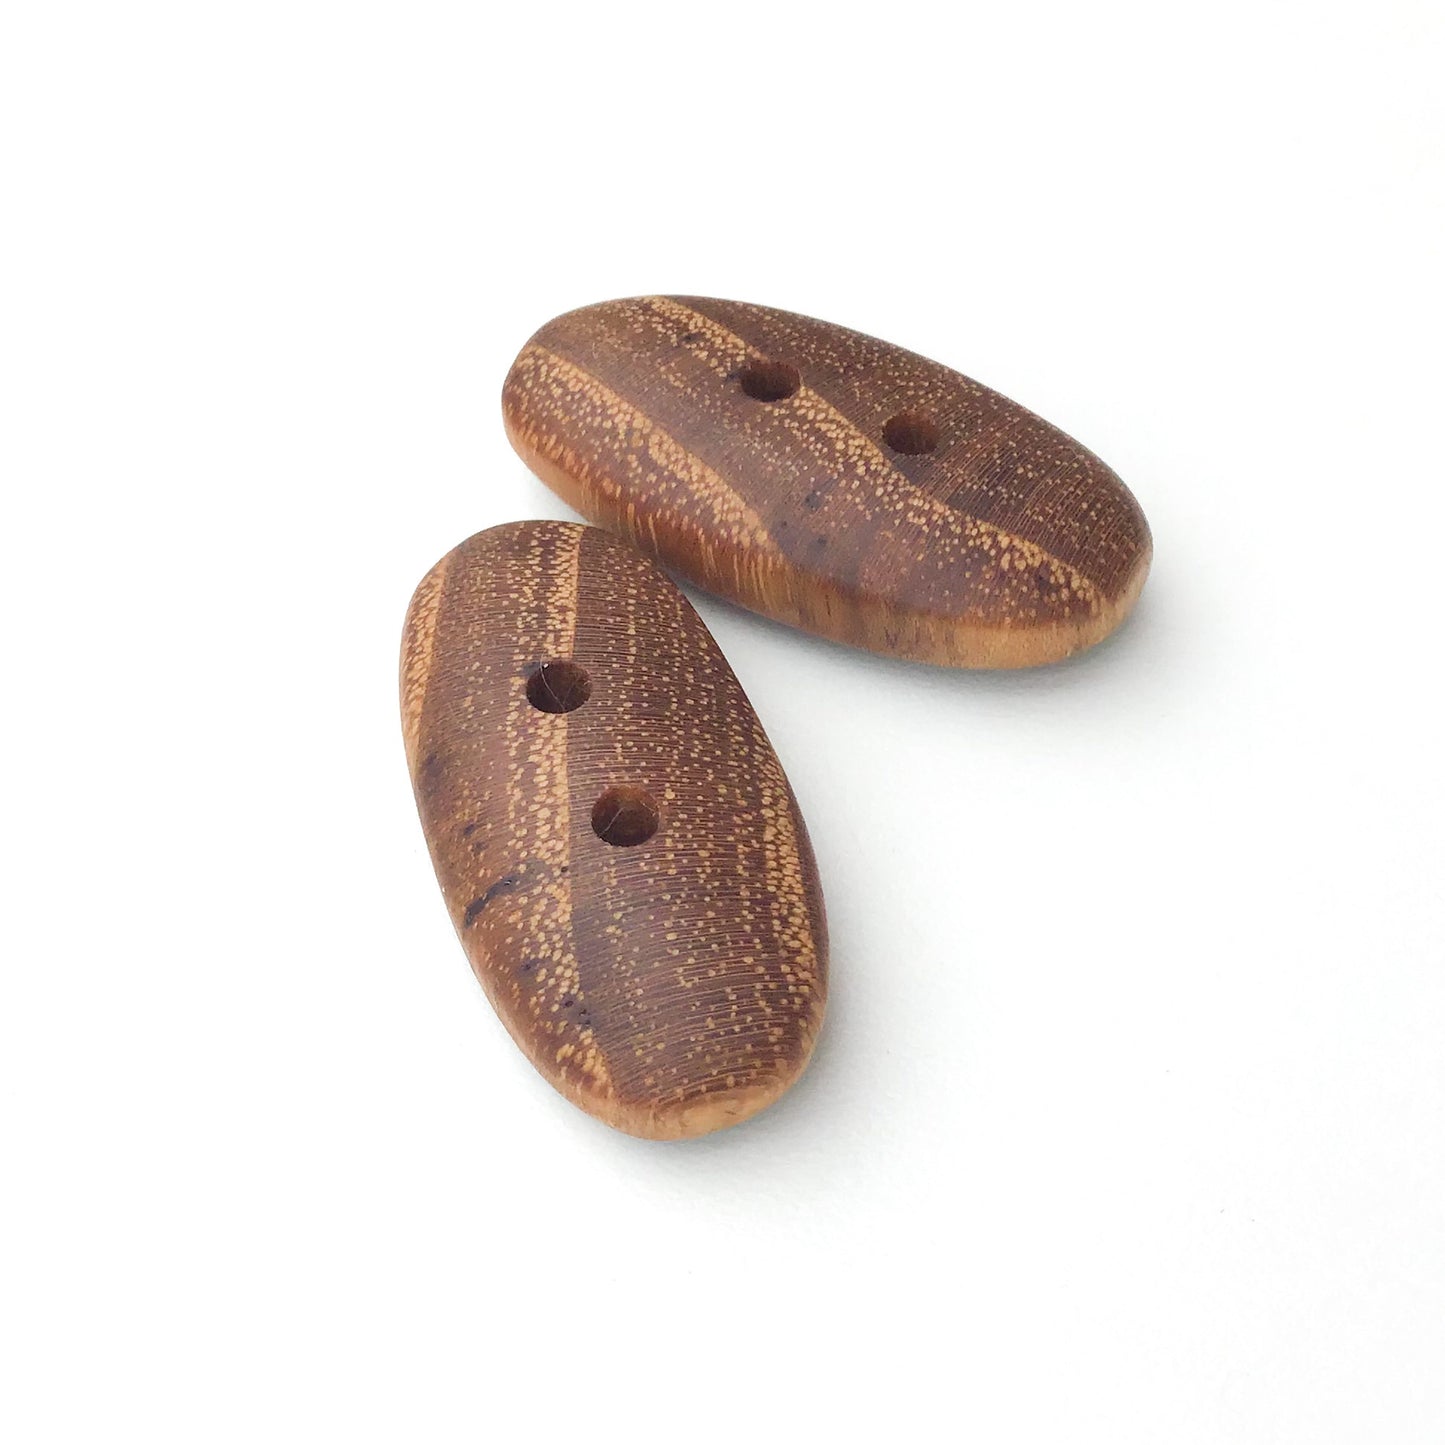 Black Locust Wood Buttons - Wooden Toggle Buttons - 11/16" X 1 7/16" - 2 Pack